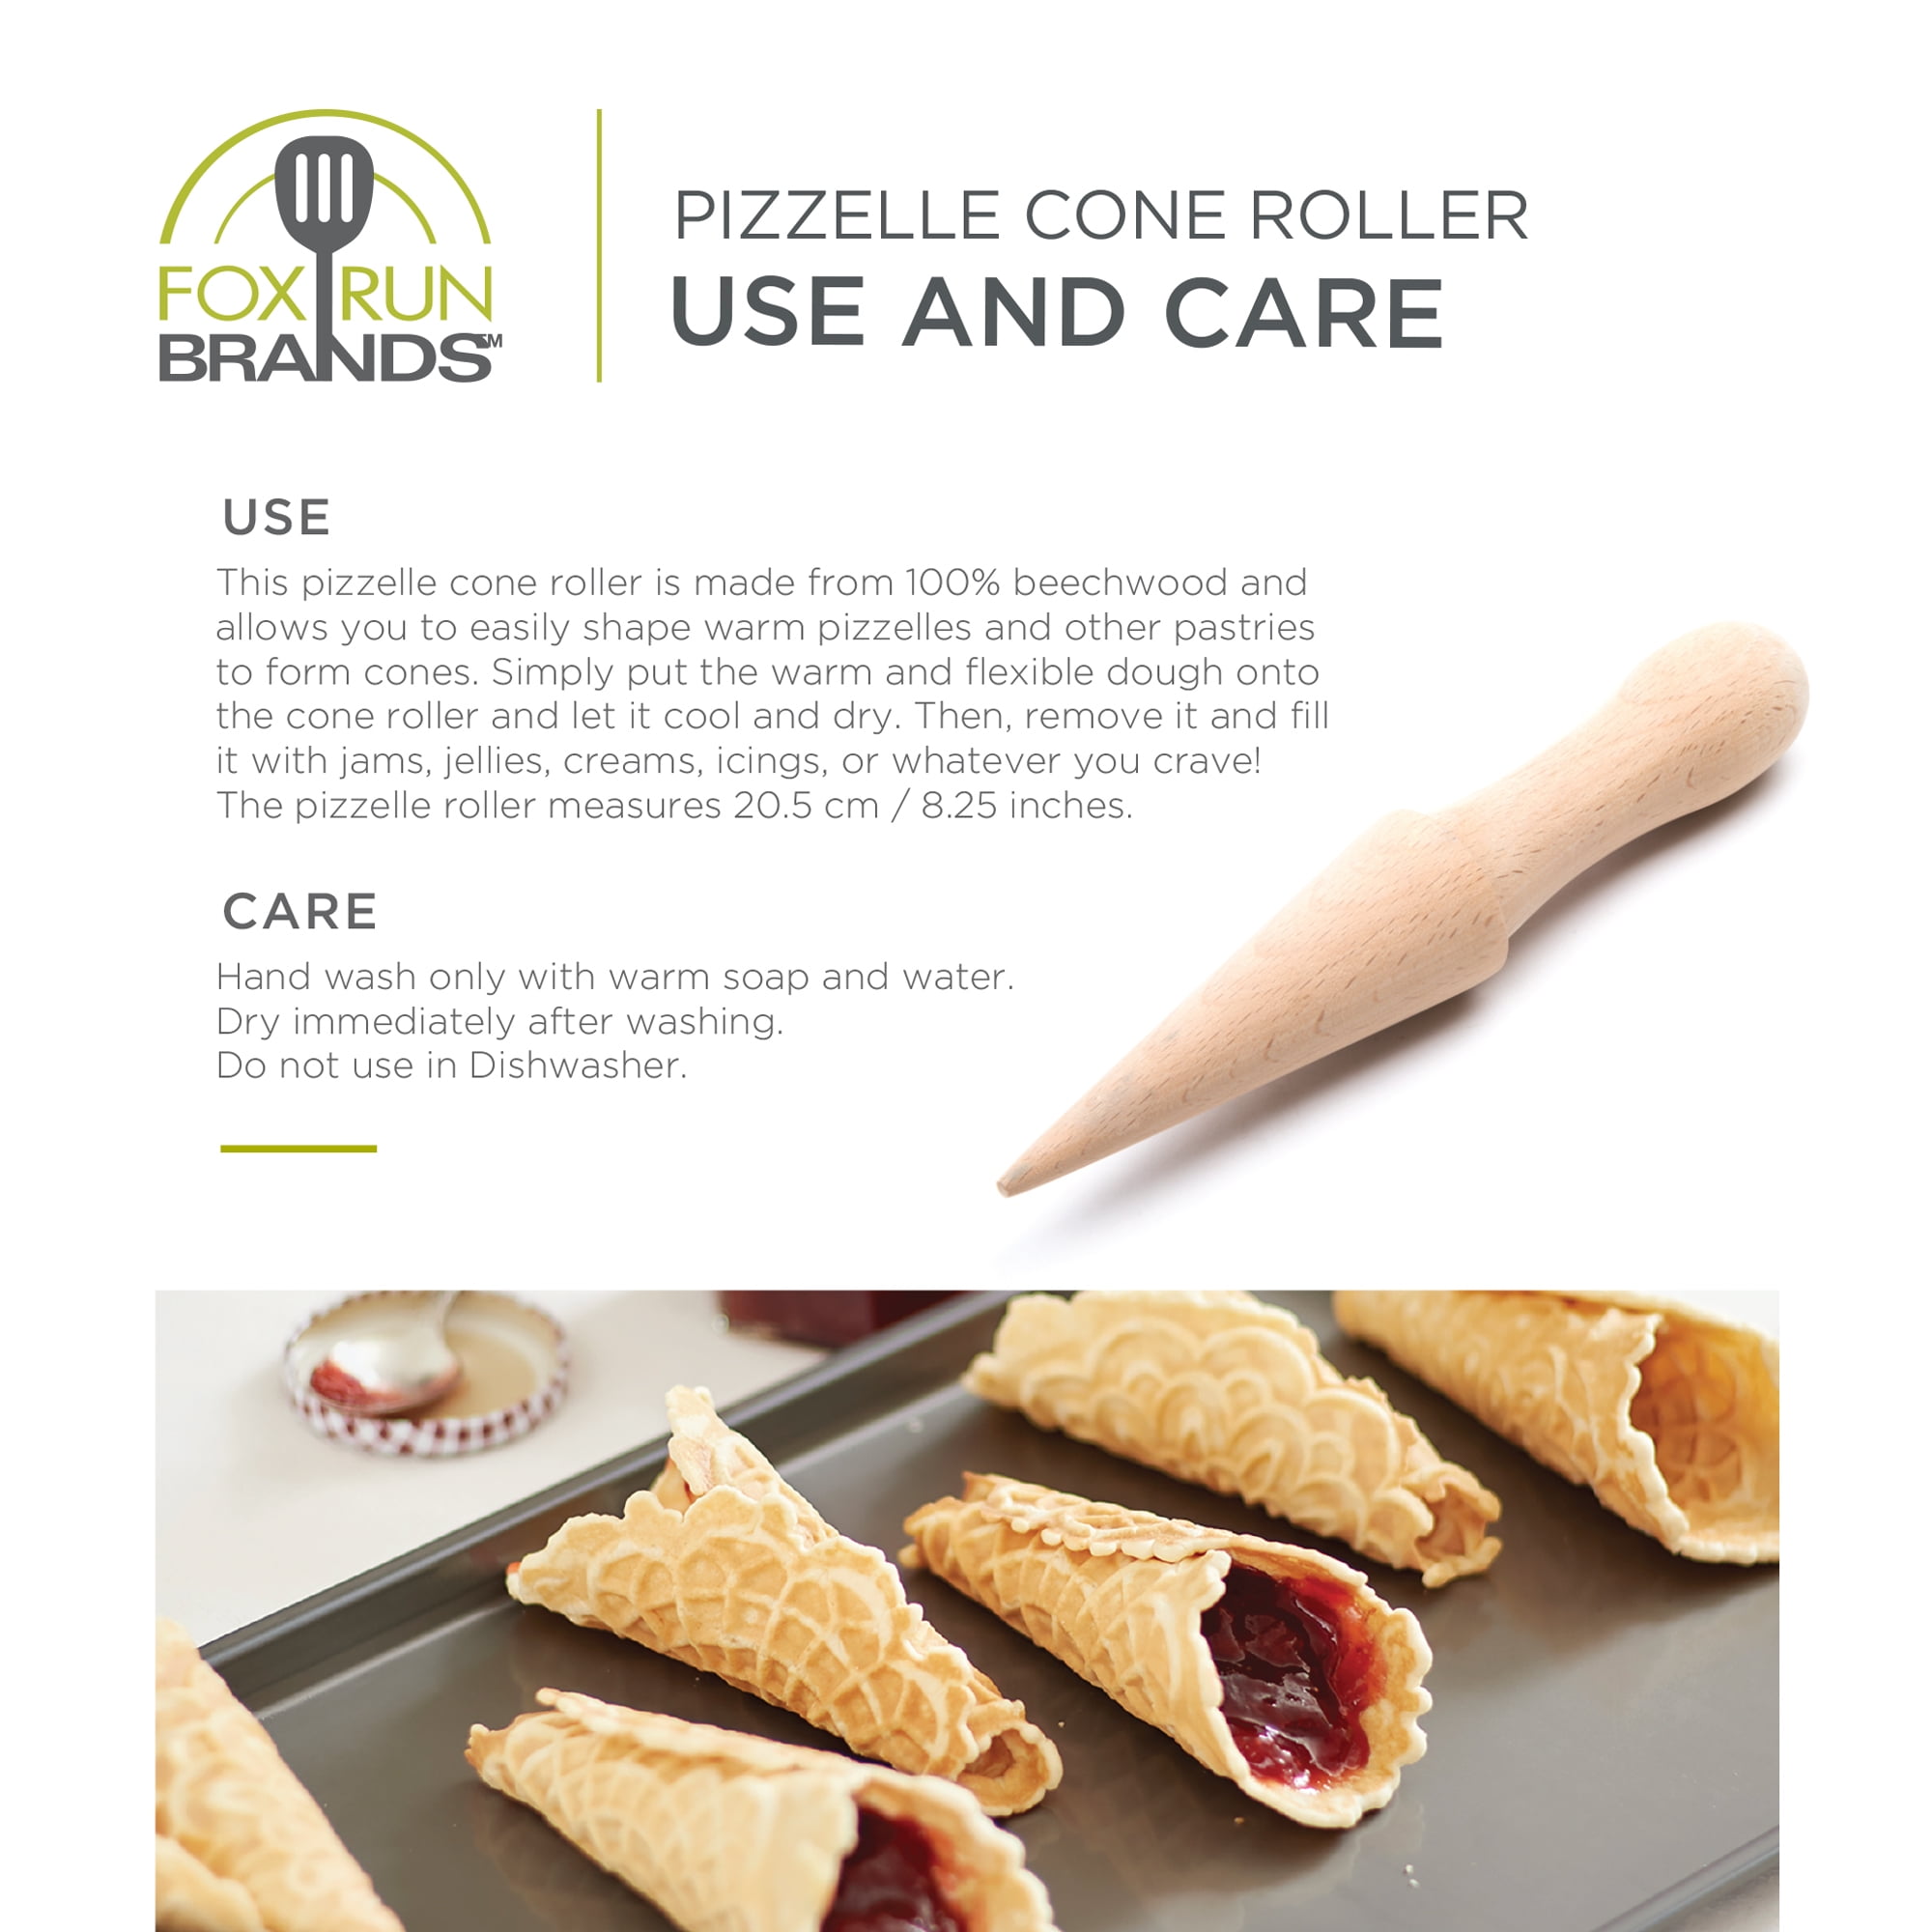 The Pizzelle Triangle